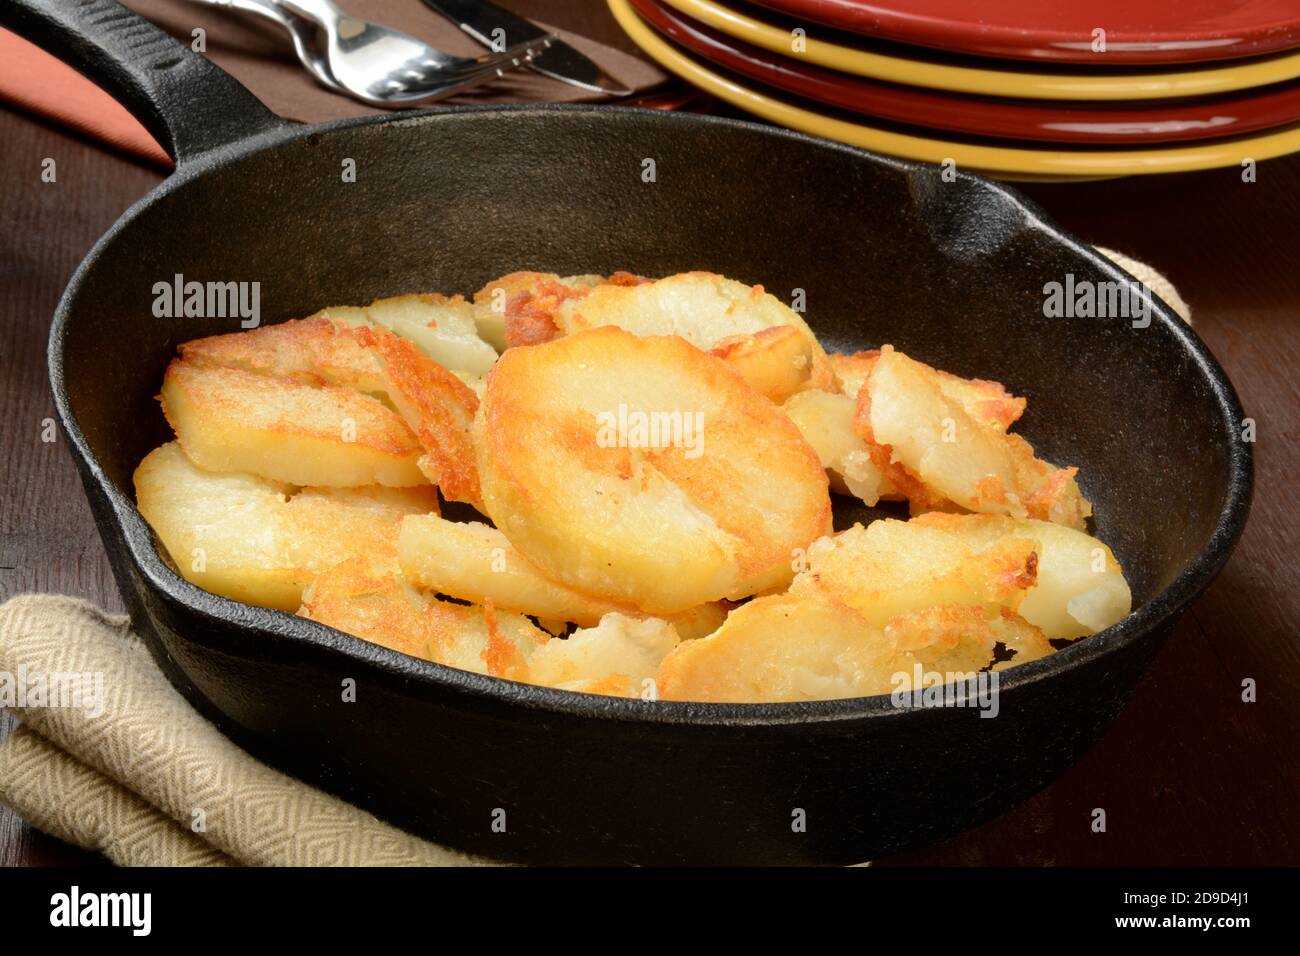 Home fried potatoes iln a cast iron skillet with serving plates Stock Photo  - Alamy